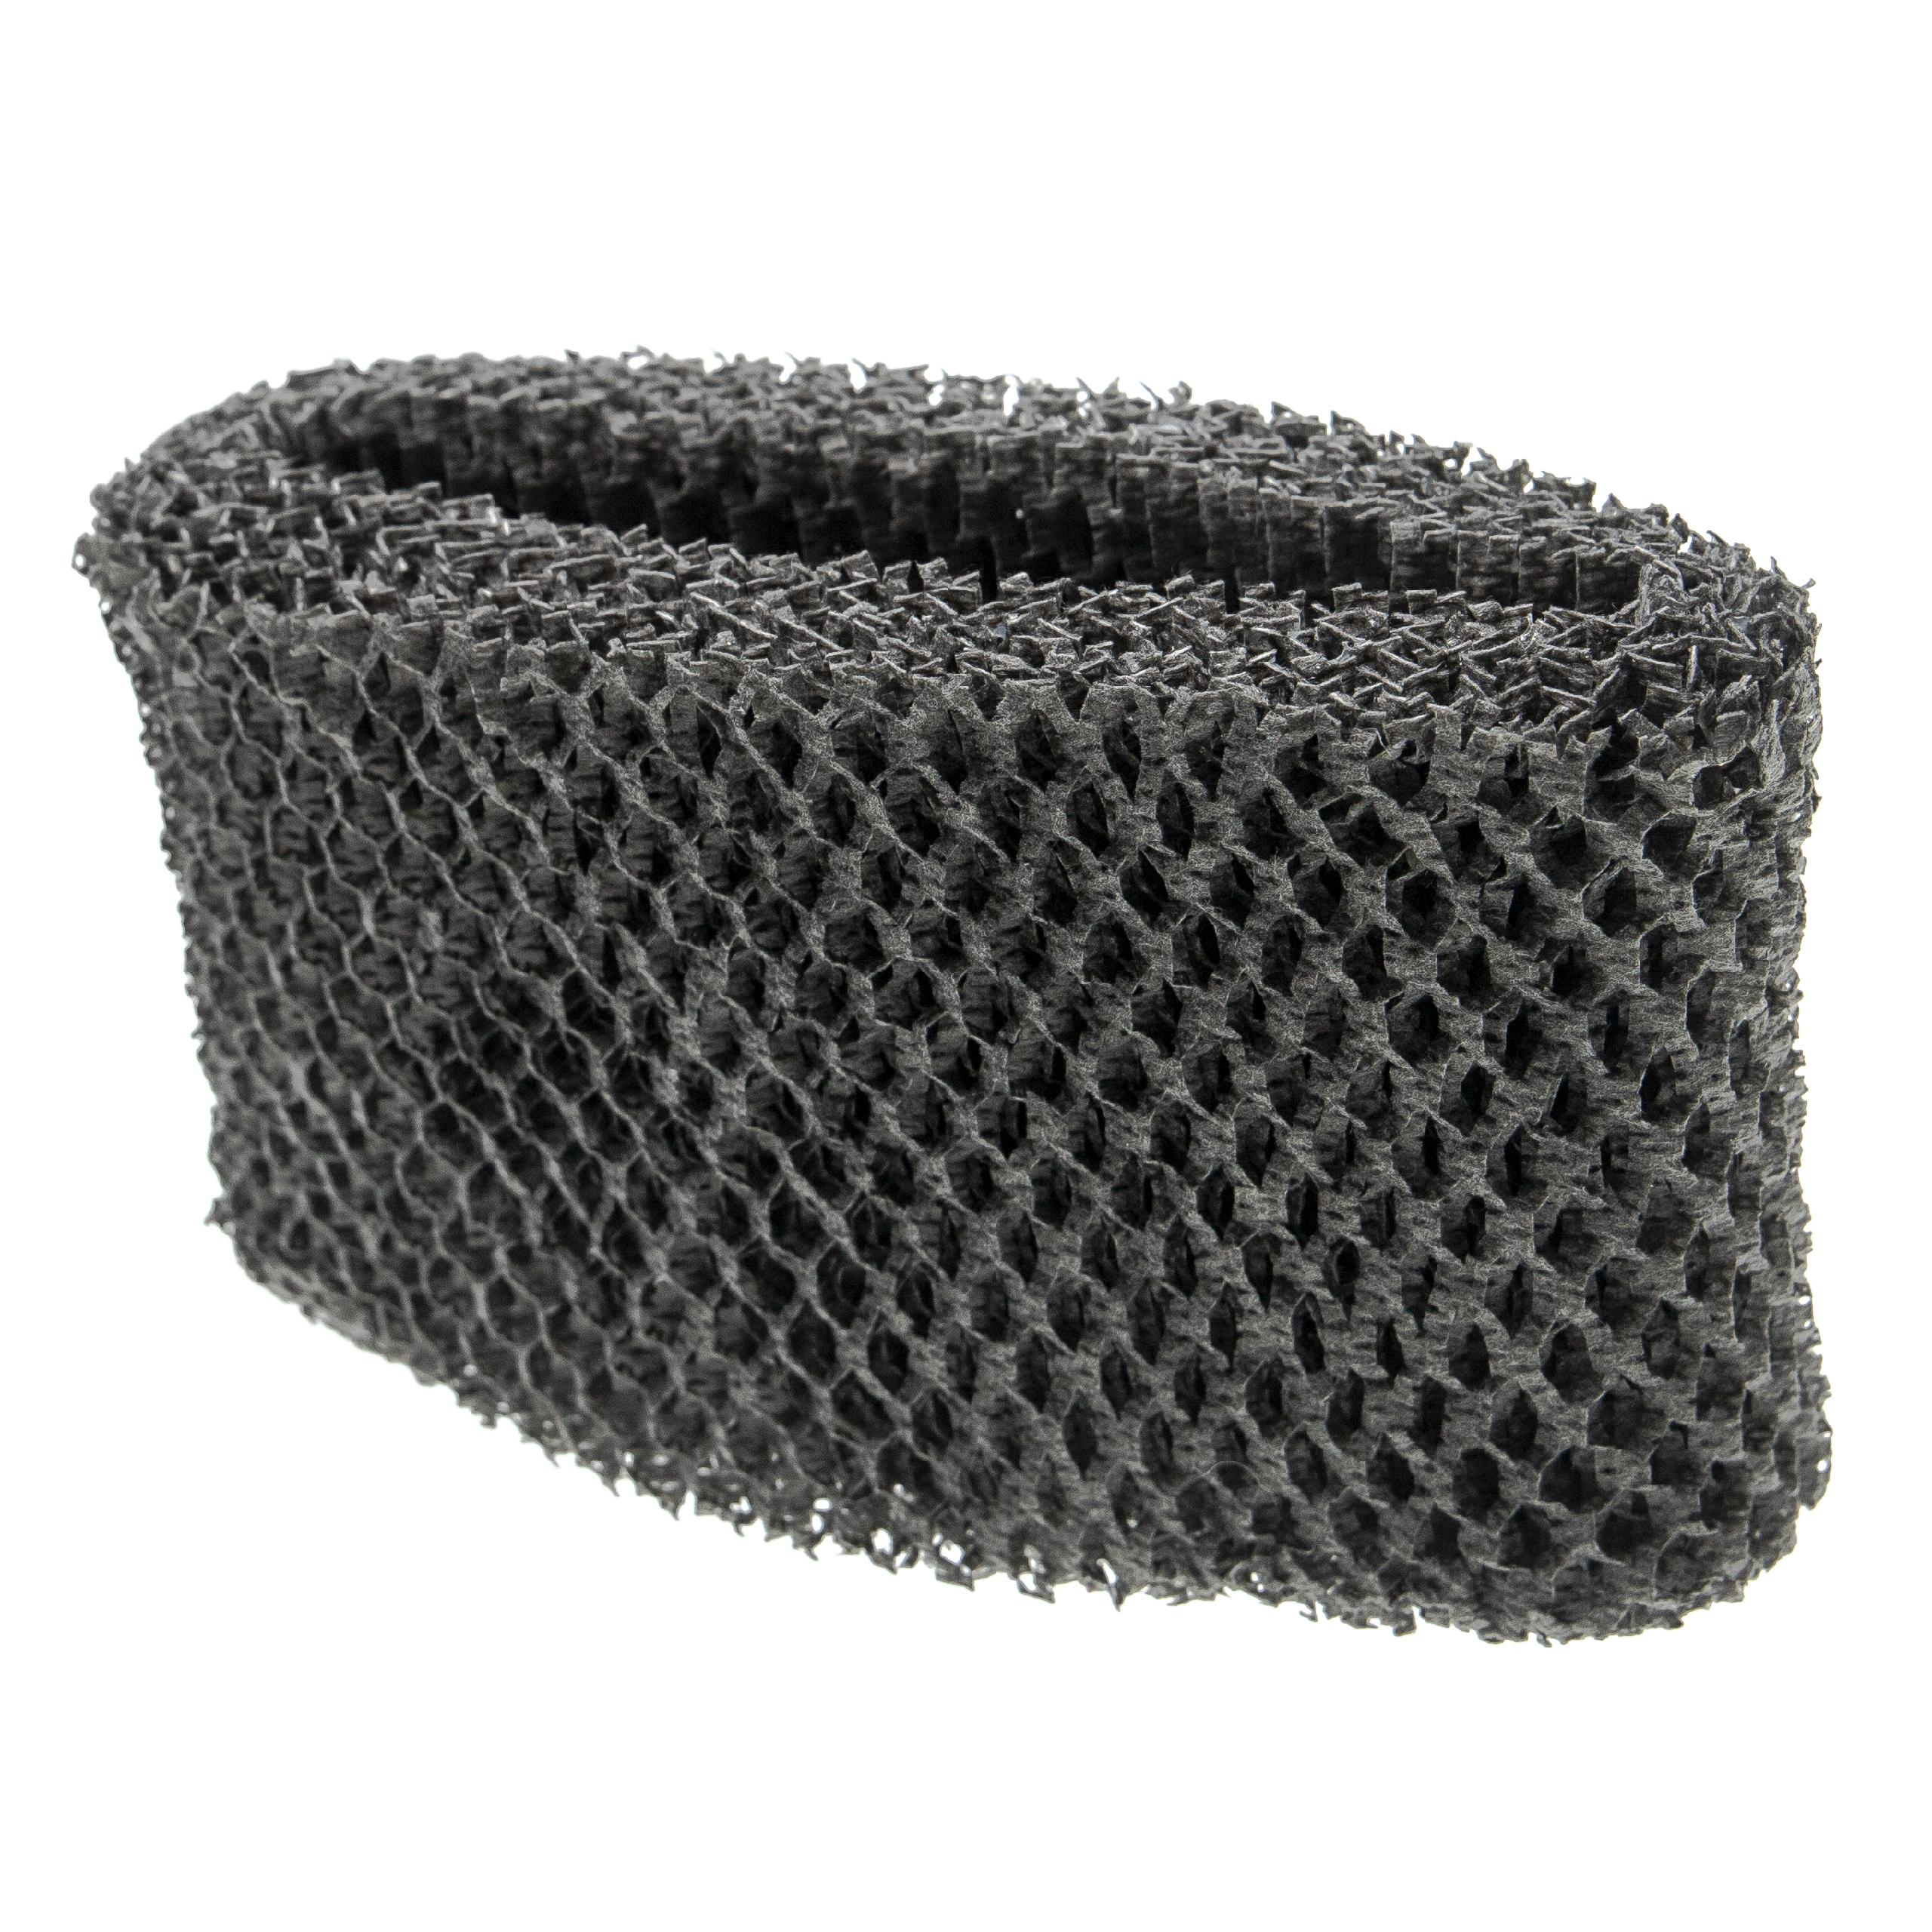 Filter replaces Philips HU4102/01, FY2401/10 for Humidifier - natural fibres in honeycomb structure